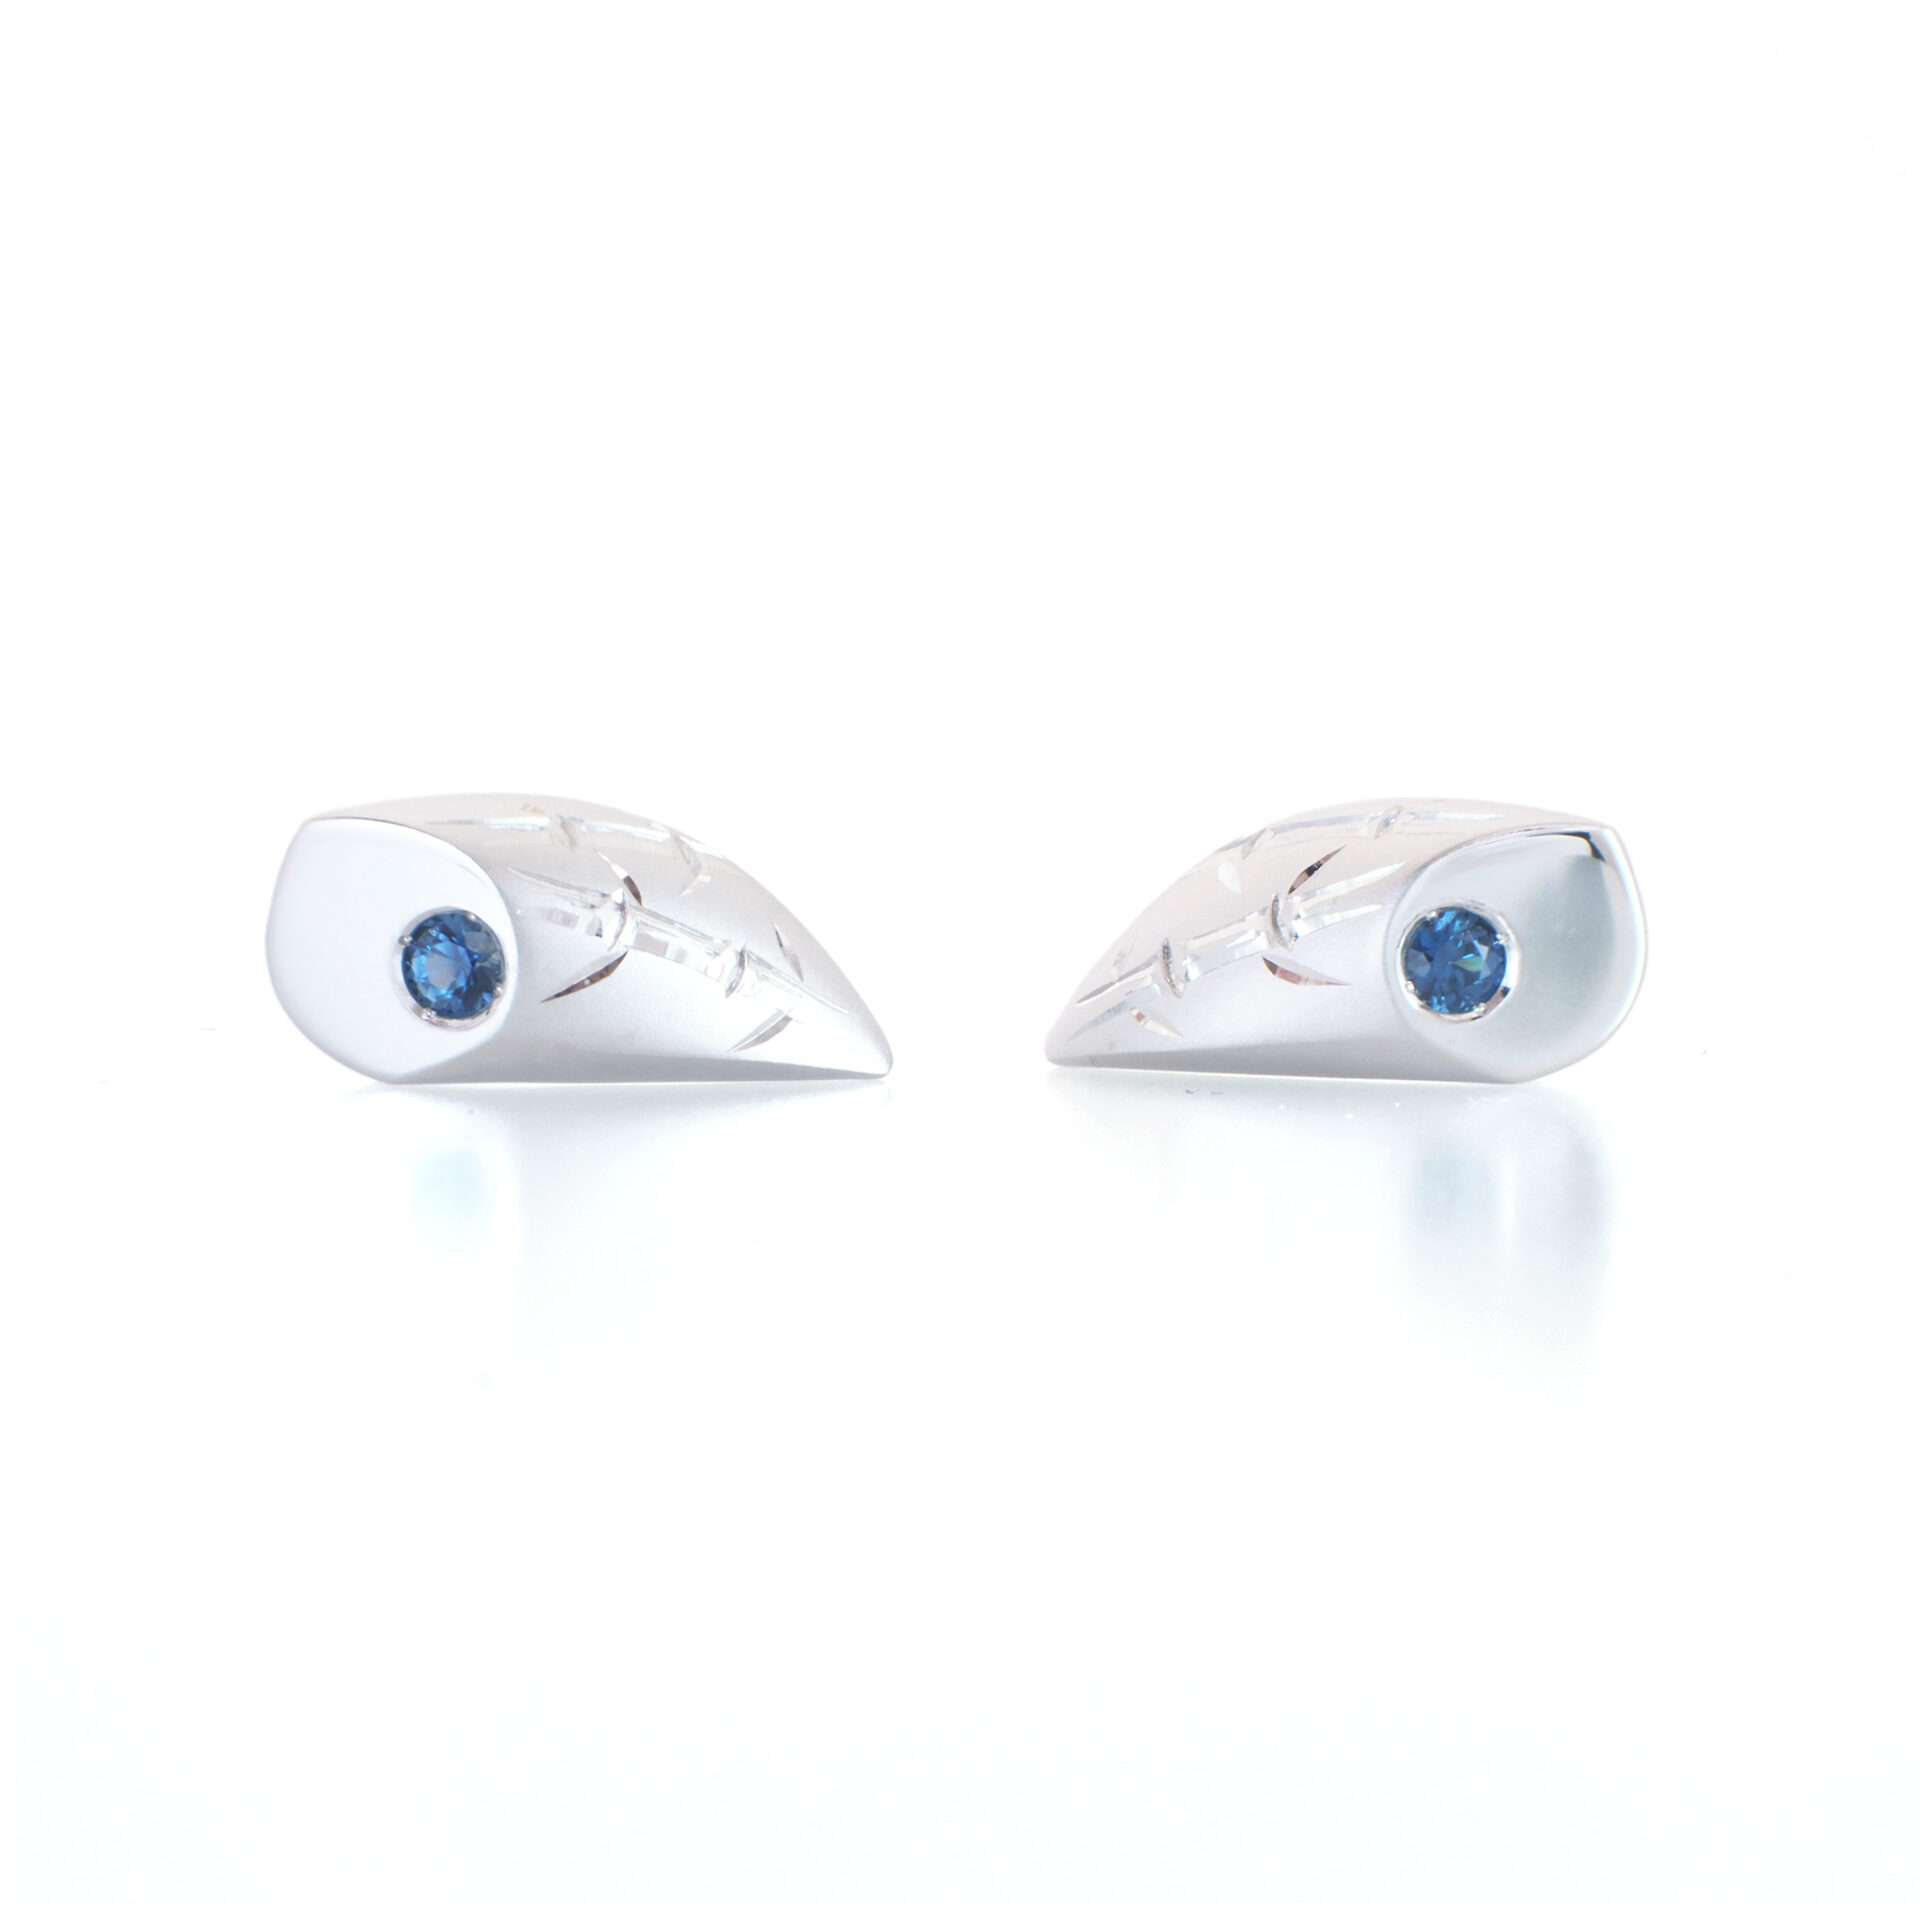 Sterling Silver Sapphire Earrings with Japanese Engraving Bespoke